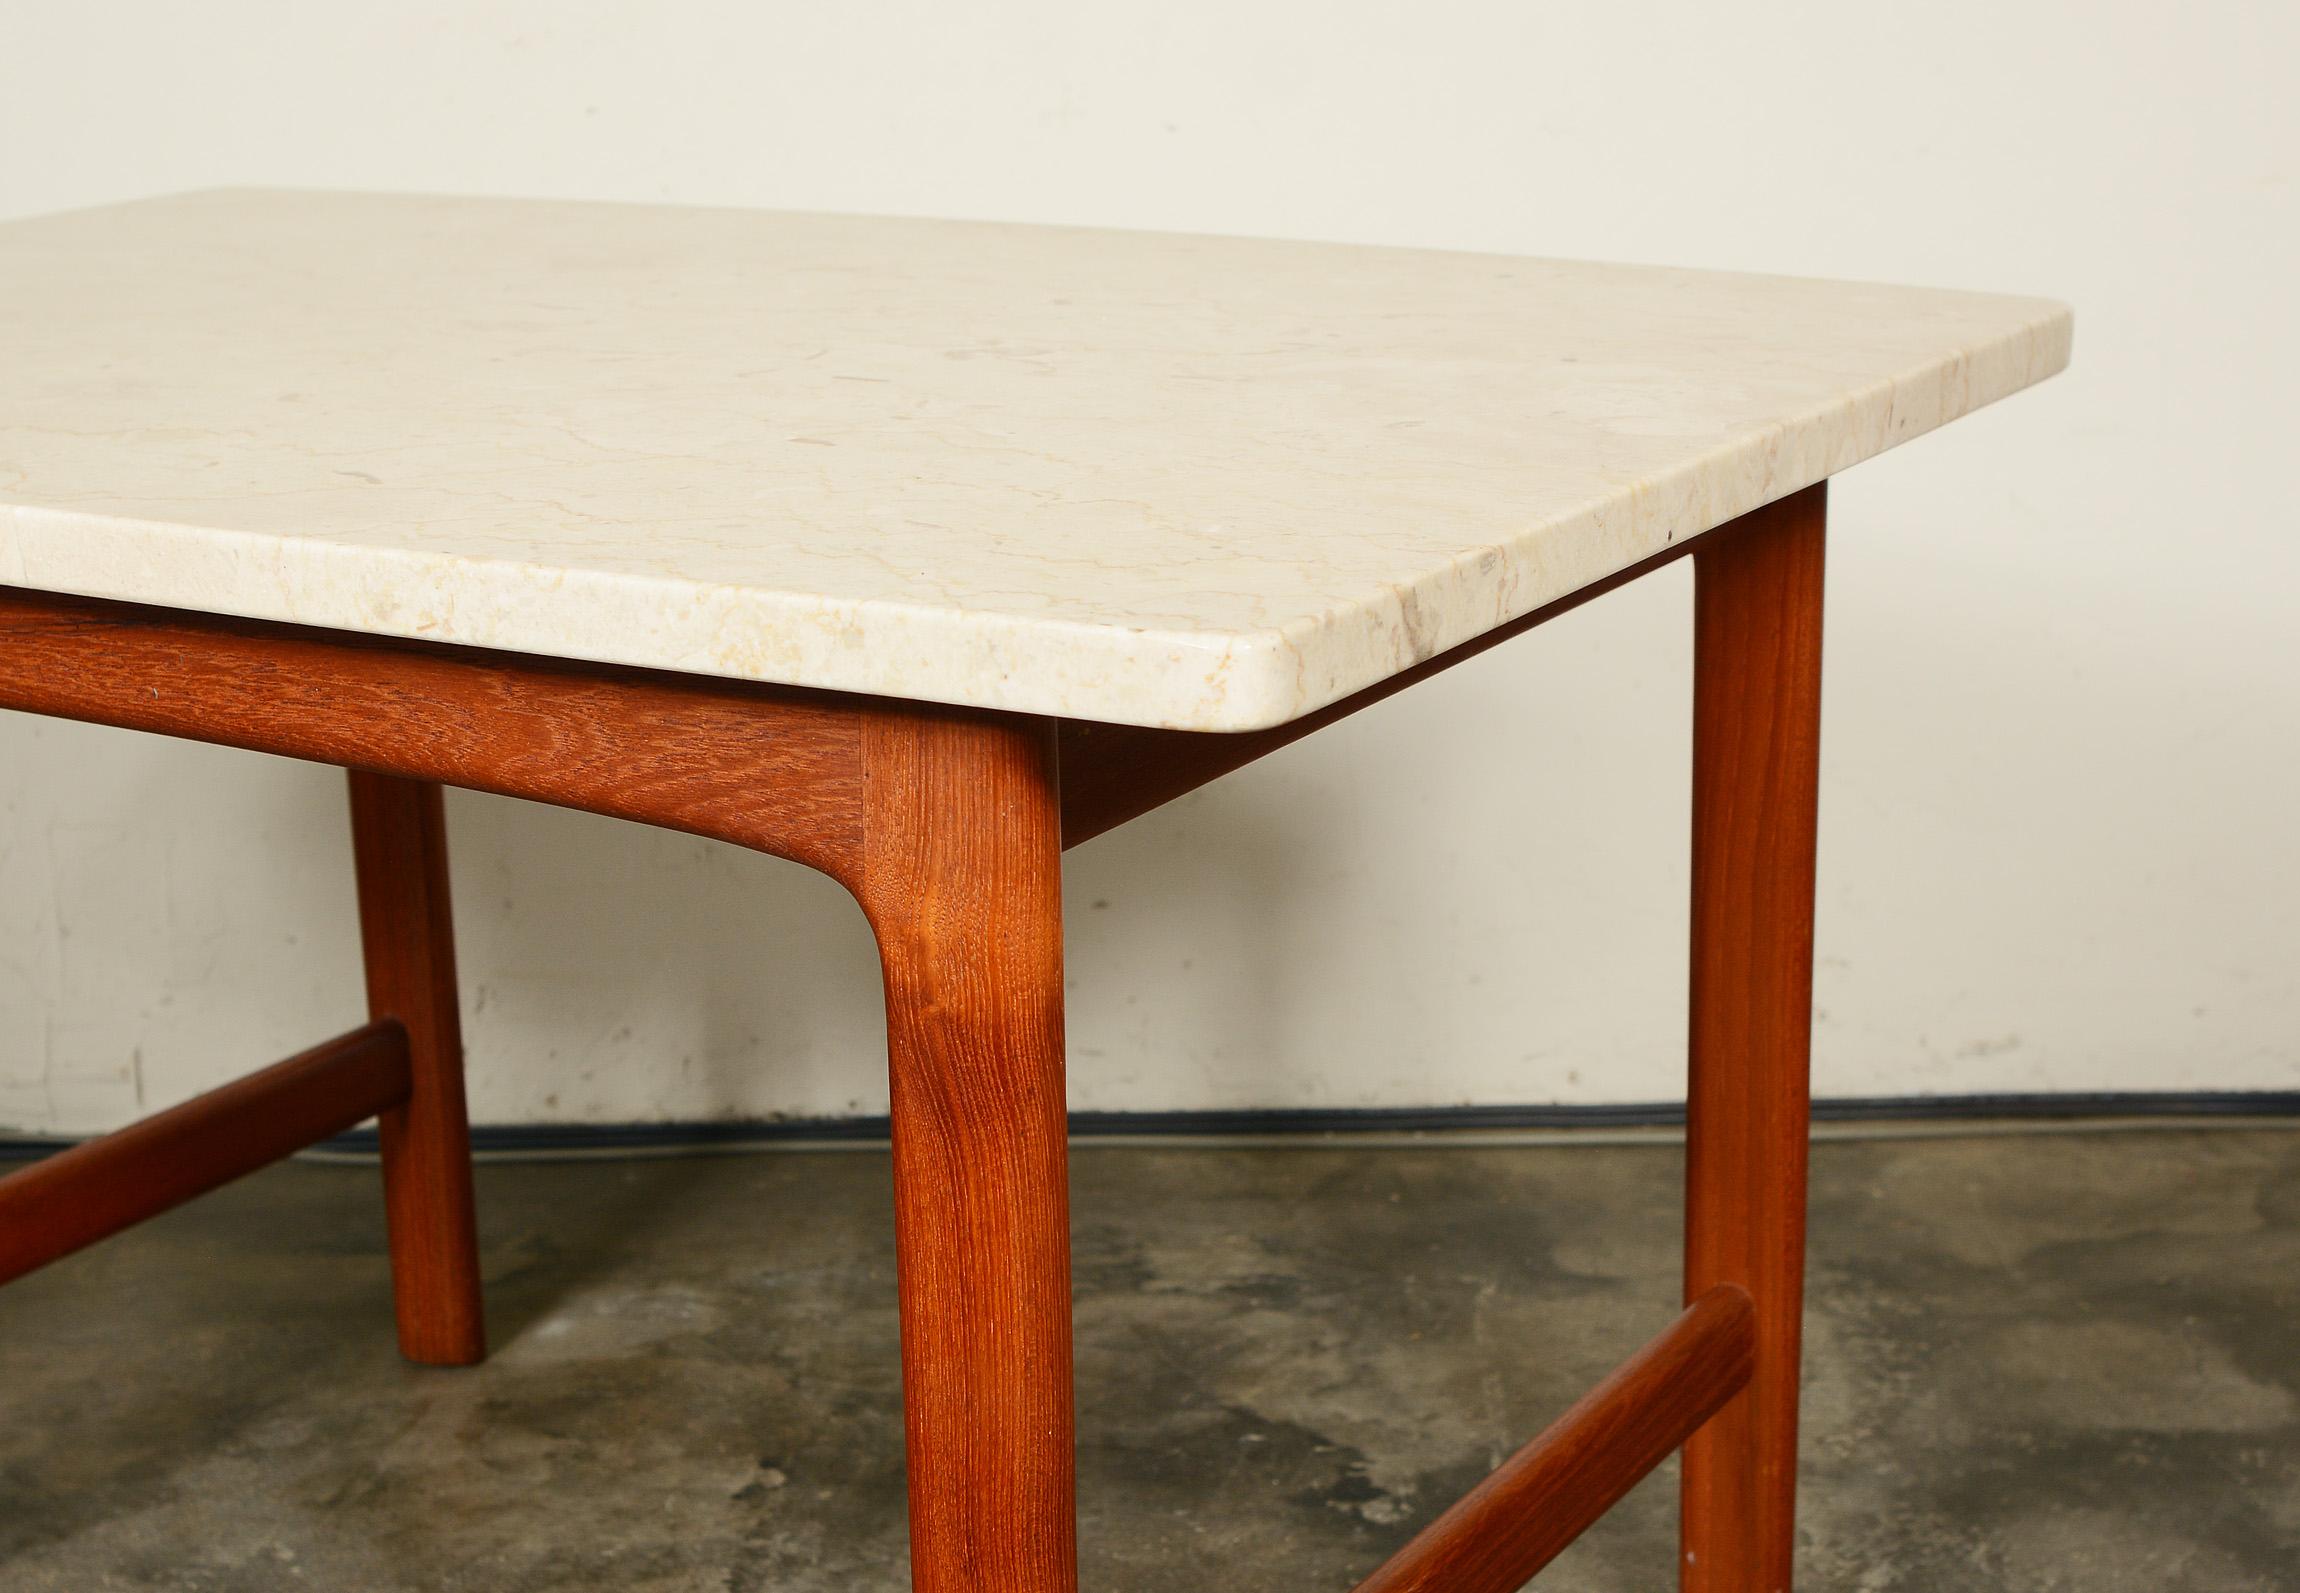 Mid-20th Century DUX Teak and Travertine Side Table by Folke Ohlsson